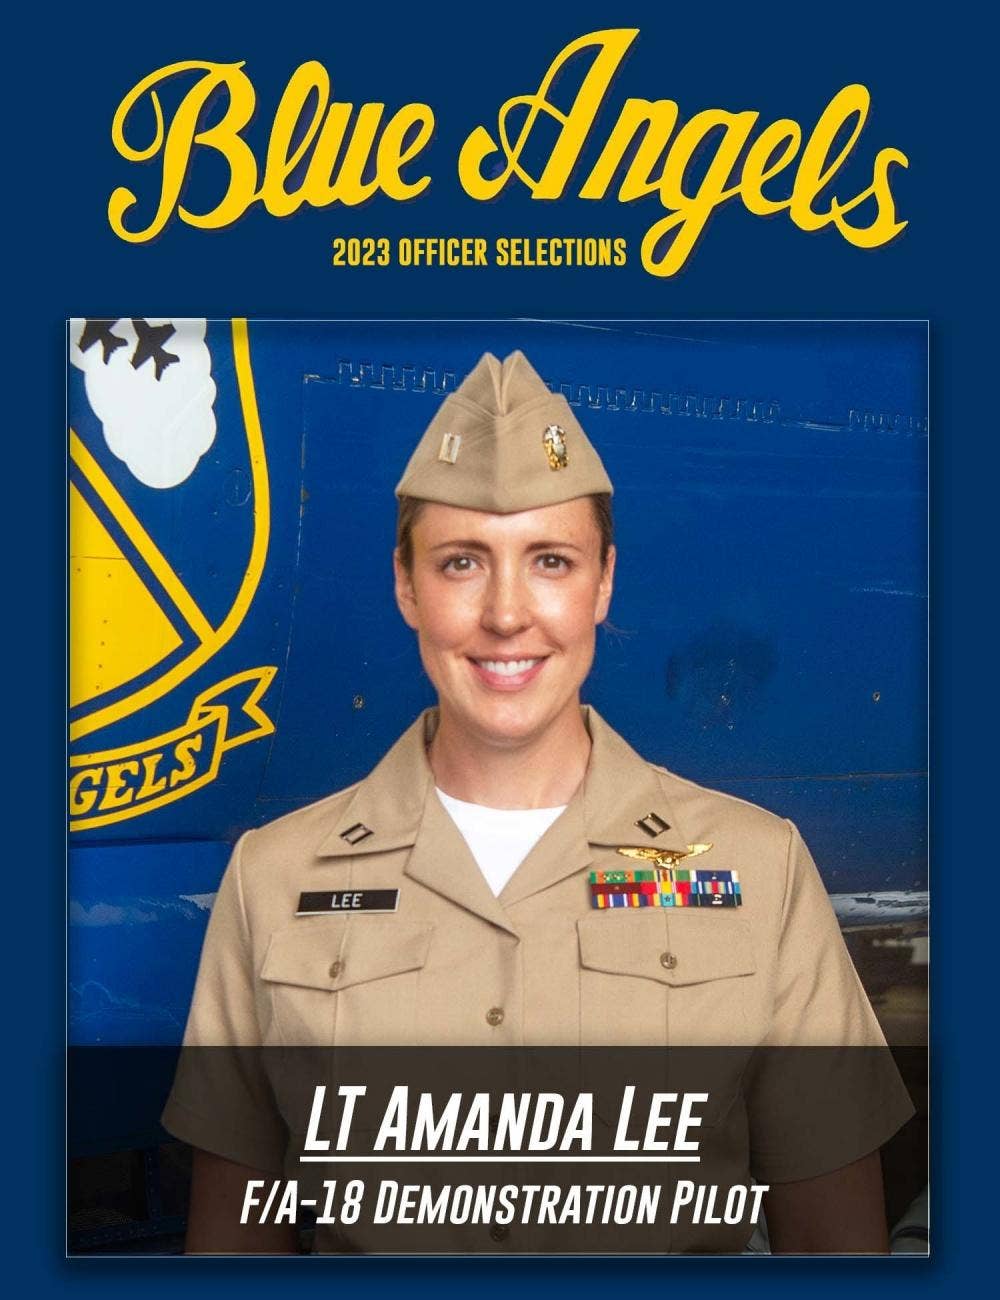 The Navy's elite Blue Angels aerial demonstration team announced that Lt. Amanda Lee has been selected to join the core six-ship unit. (U.S. Navy photo)